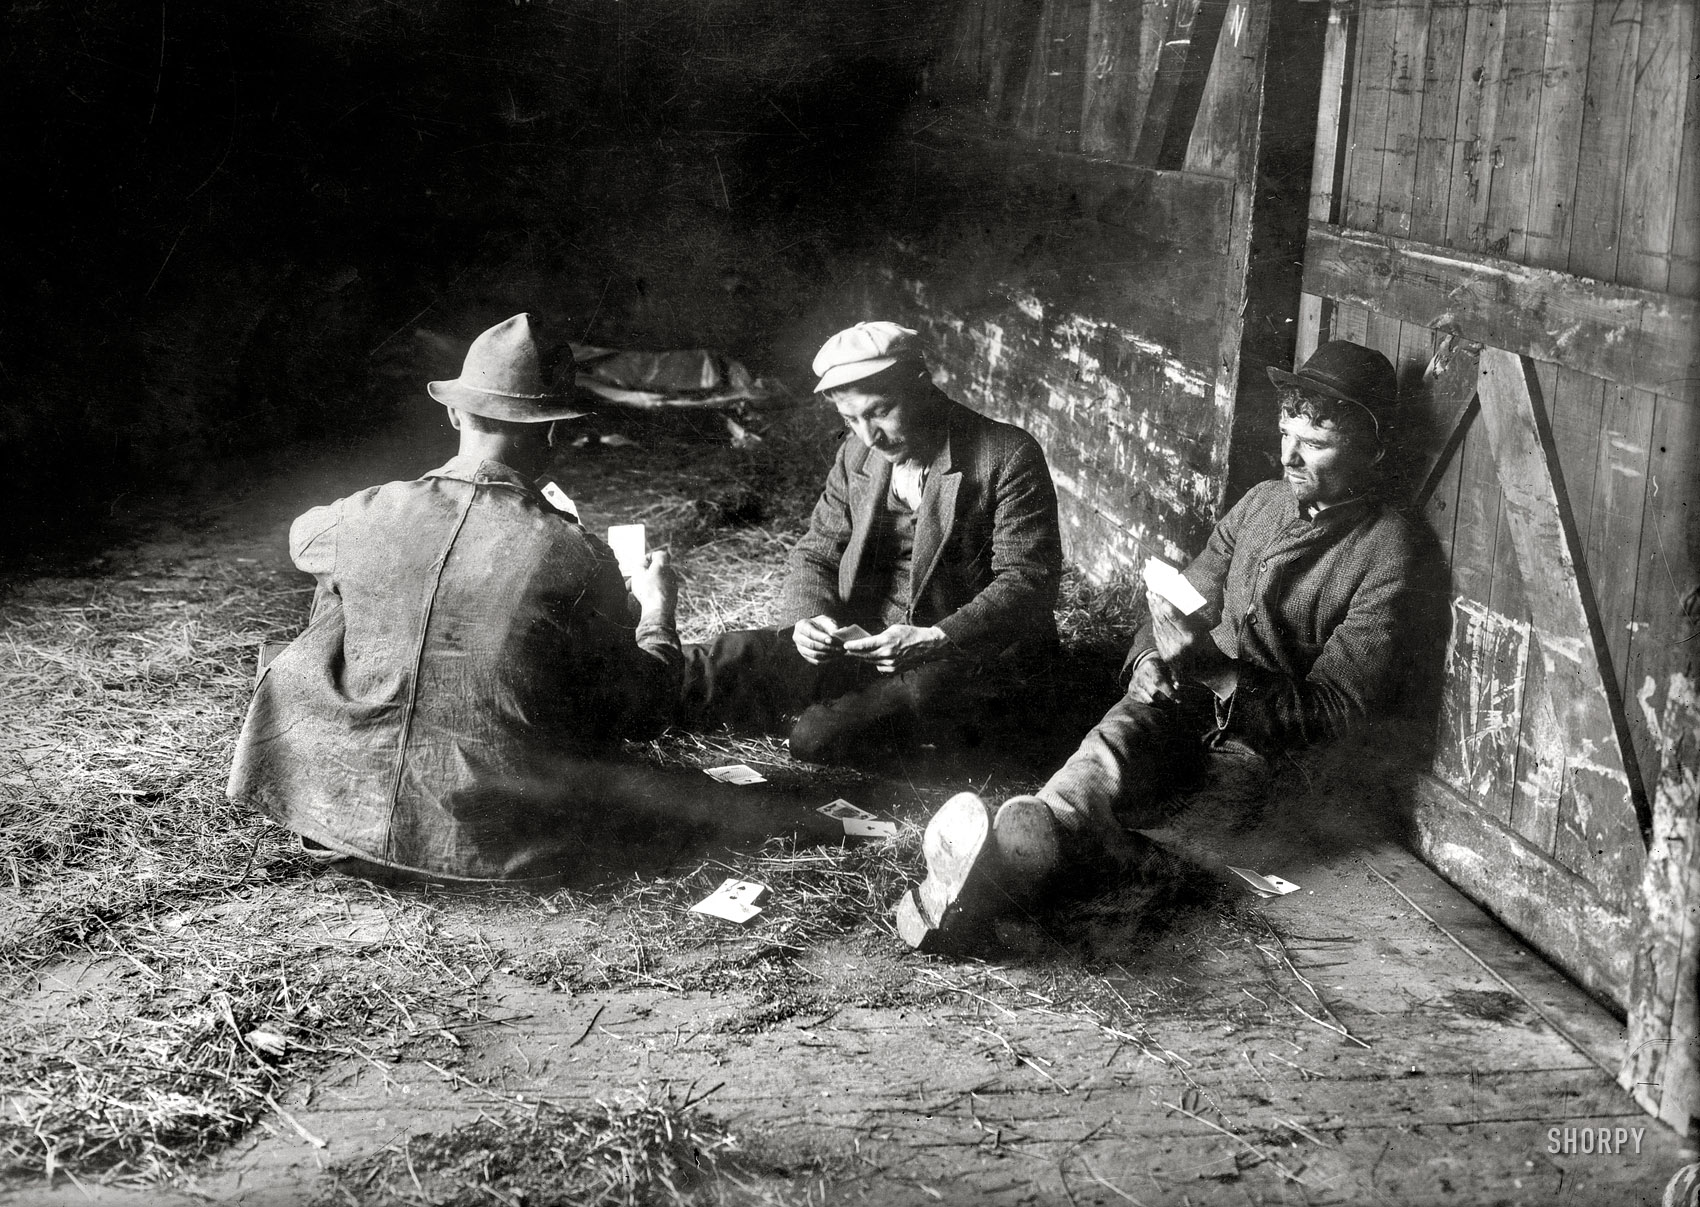 Location unknown circa 1915. "Tramps in boxcar playing cards." 5x7 glass negative, George Grantham Bain Collection. View full size.